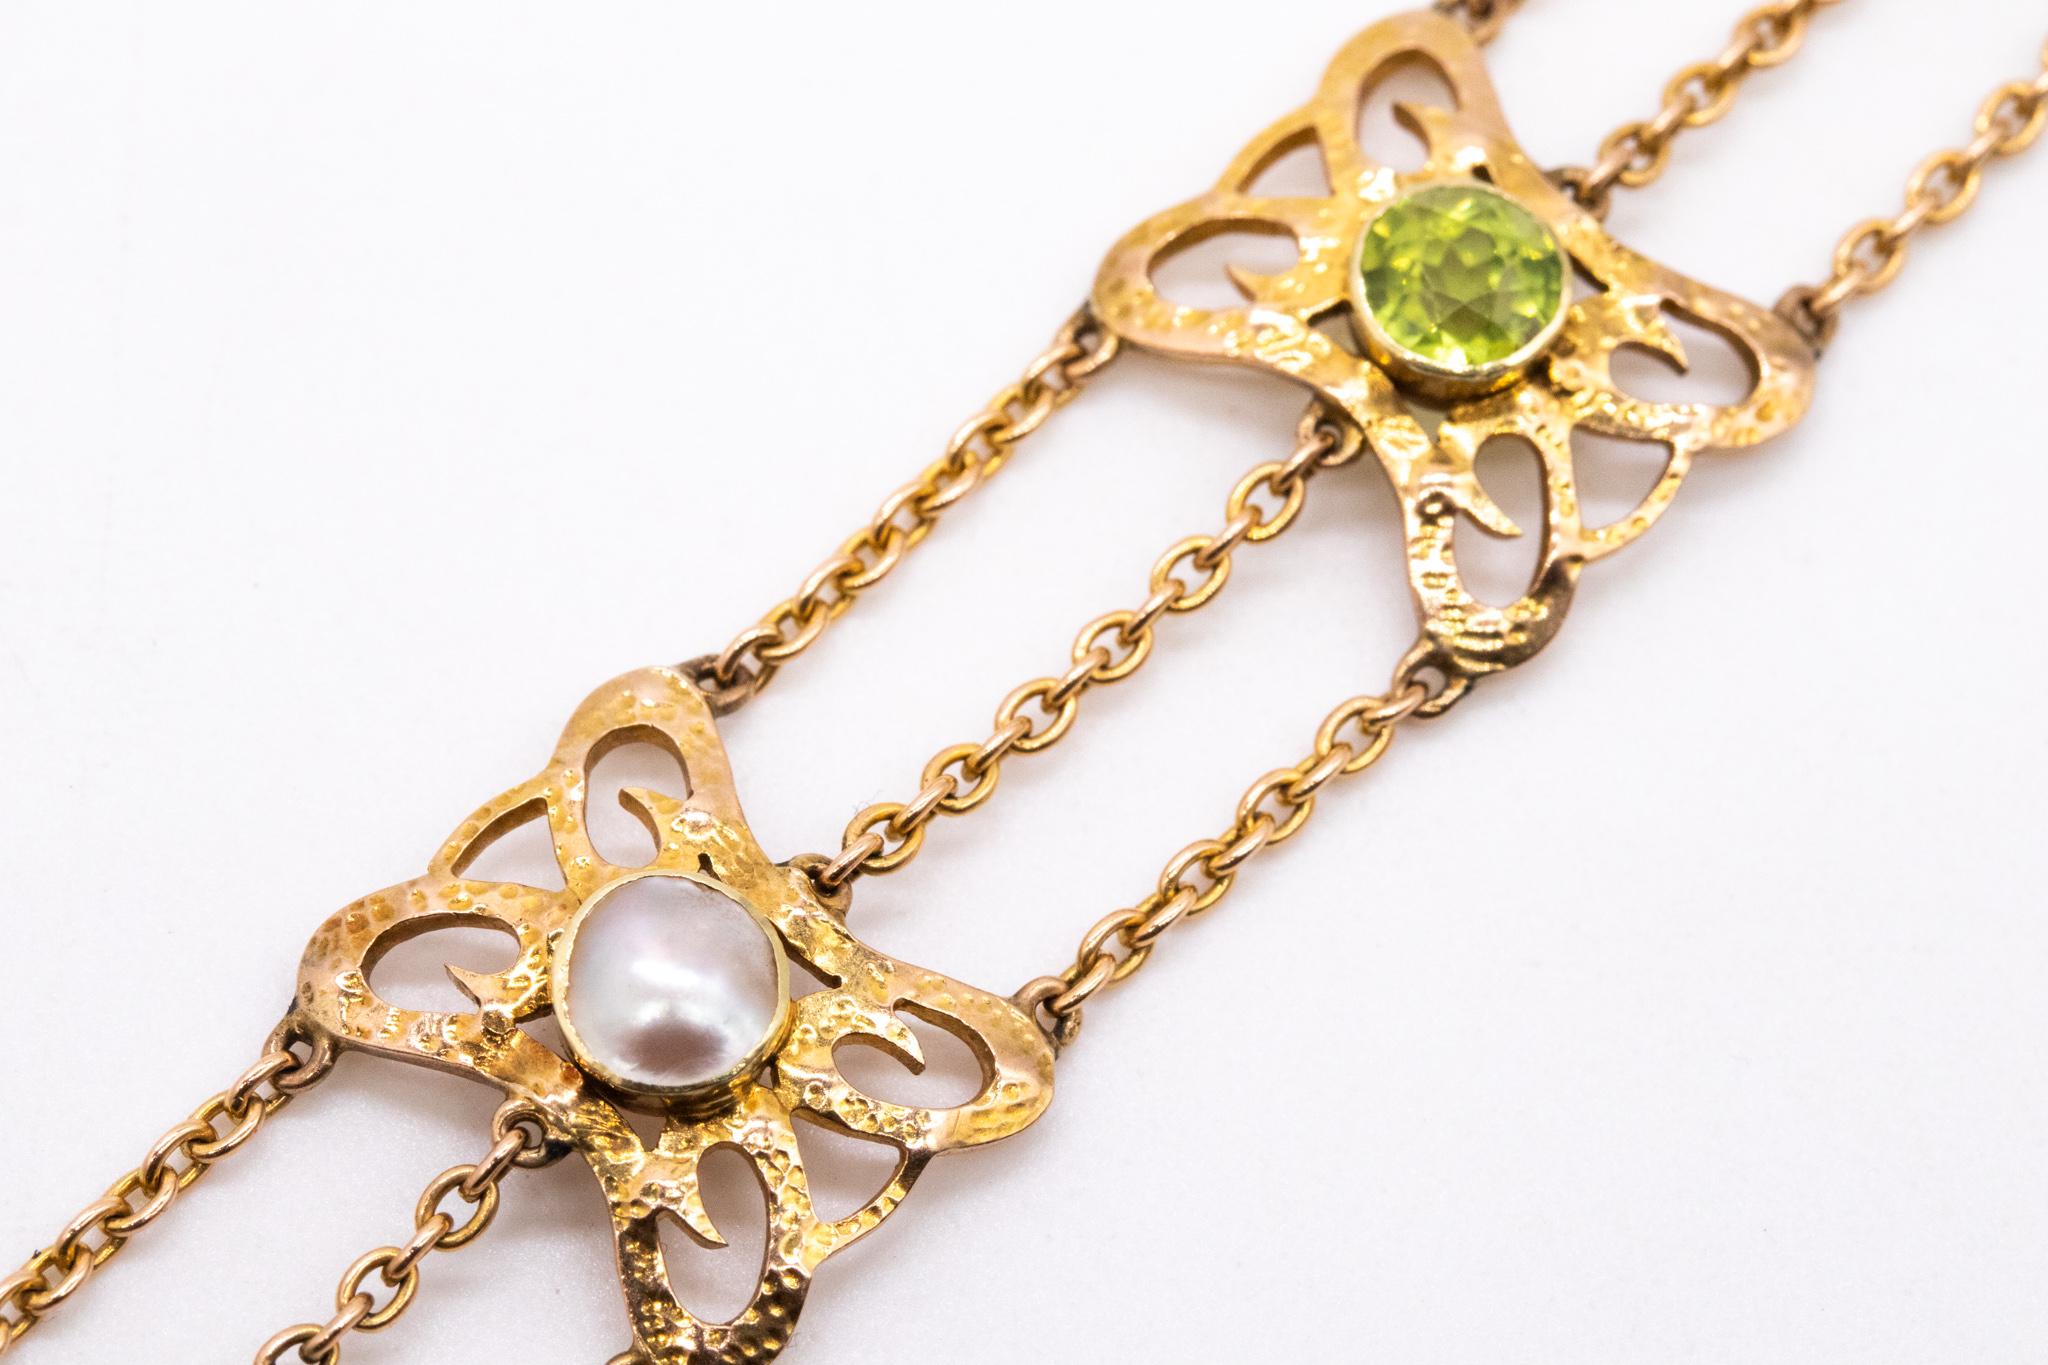 Mixed Cut British 1900 Liberty Art and Craft Bracelet in 15 Cts with Pearls and Peridots For Sale